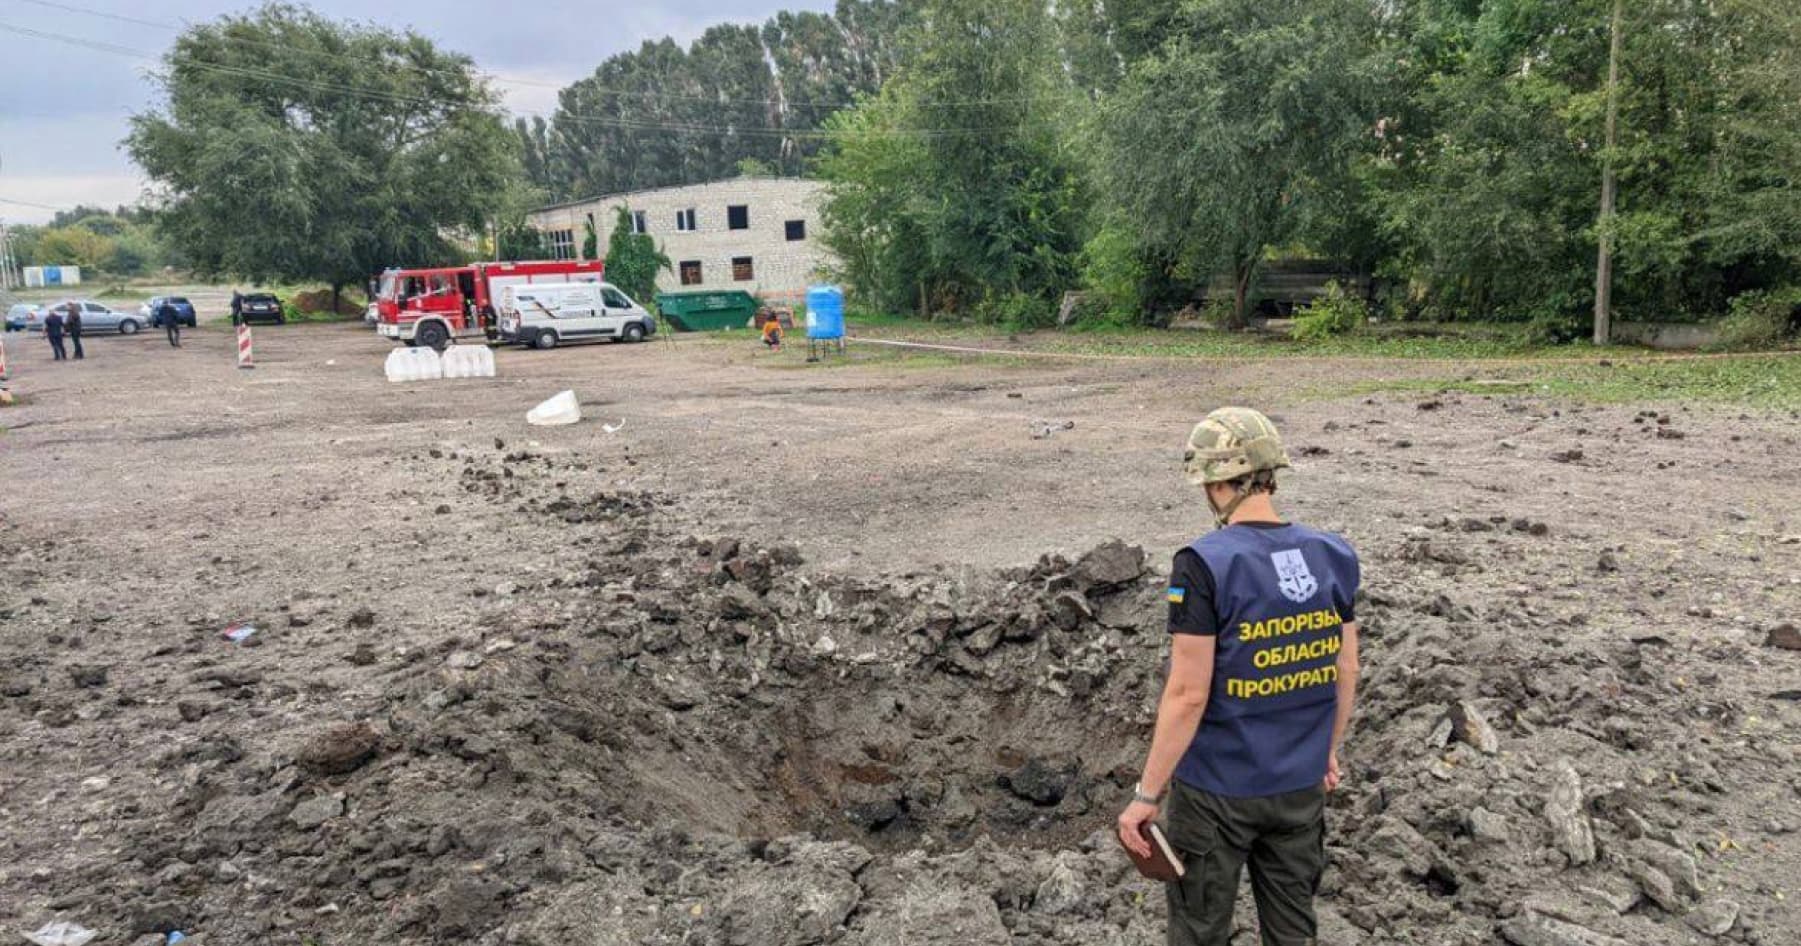 The Russians launched a missile attack on a civilian humanitarian convoy on the way out of Zaporizhzhia — at least 25 people were killed, and 28 were injured